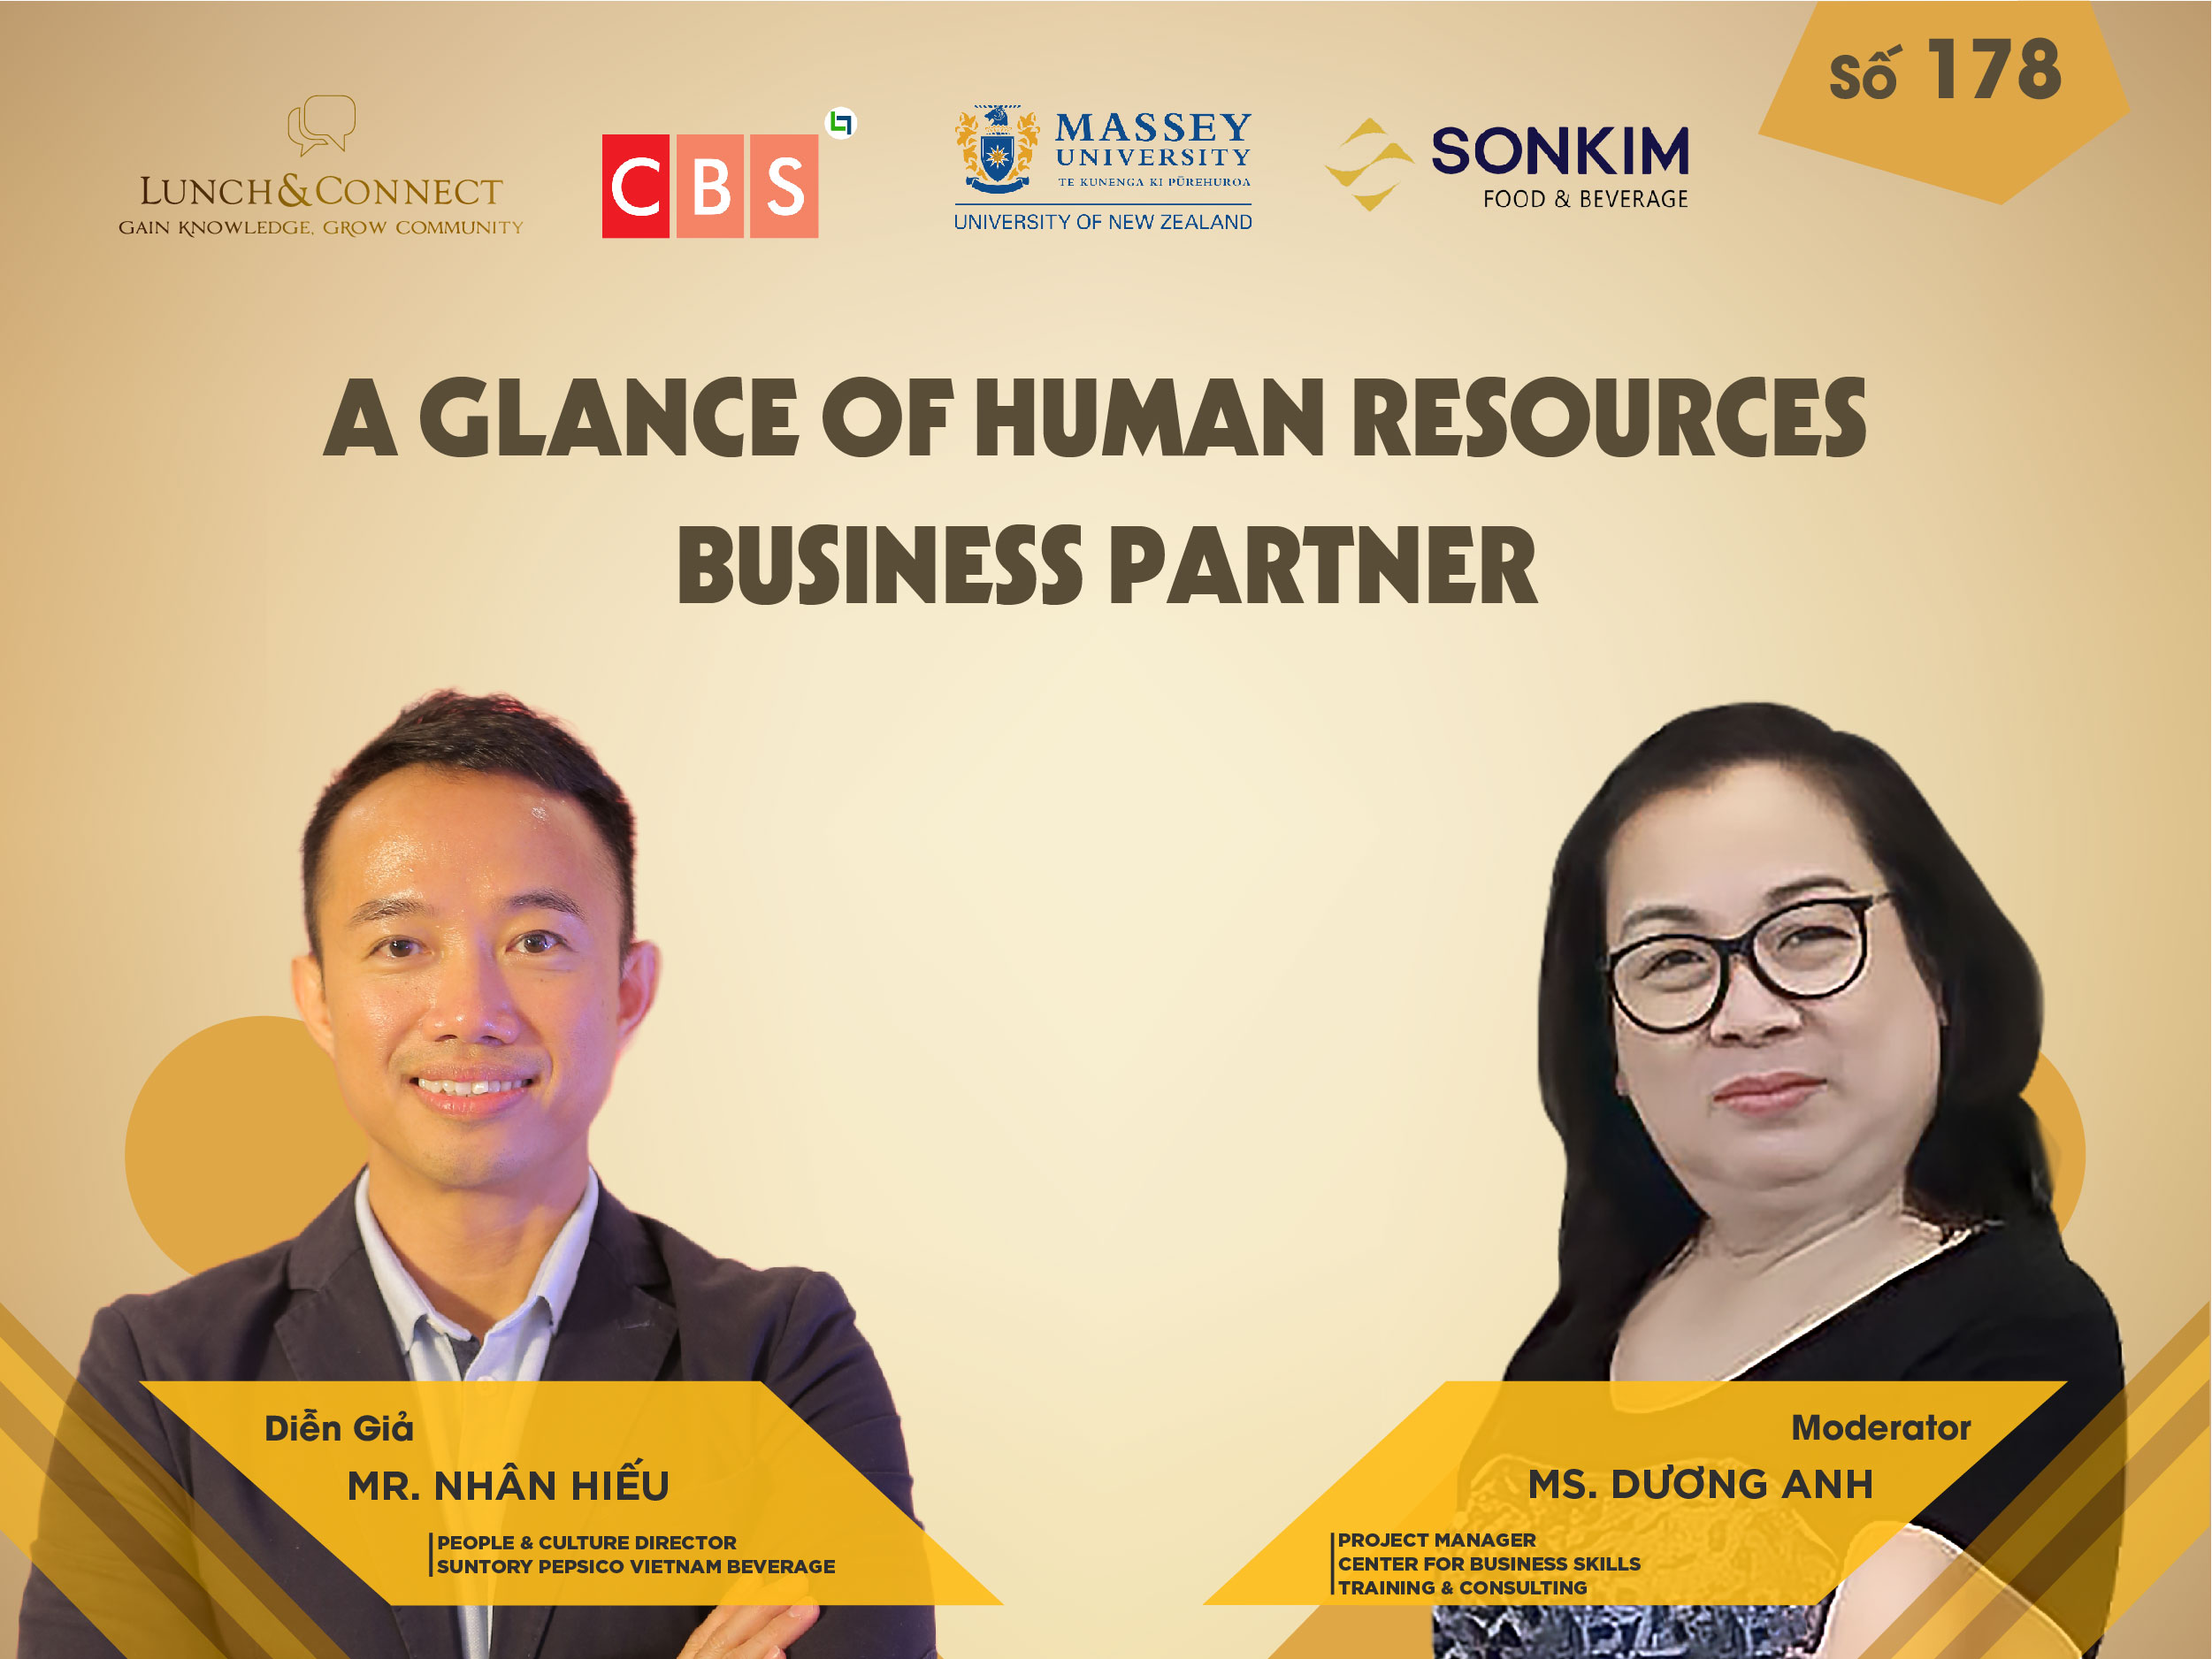 [ Lunch&Connect Số 178] – HR- FINANCE COMMUNITY: A GLANCE OF HUMAN RESOURCES BUSINESS PARTNER